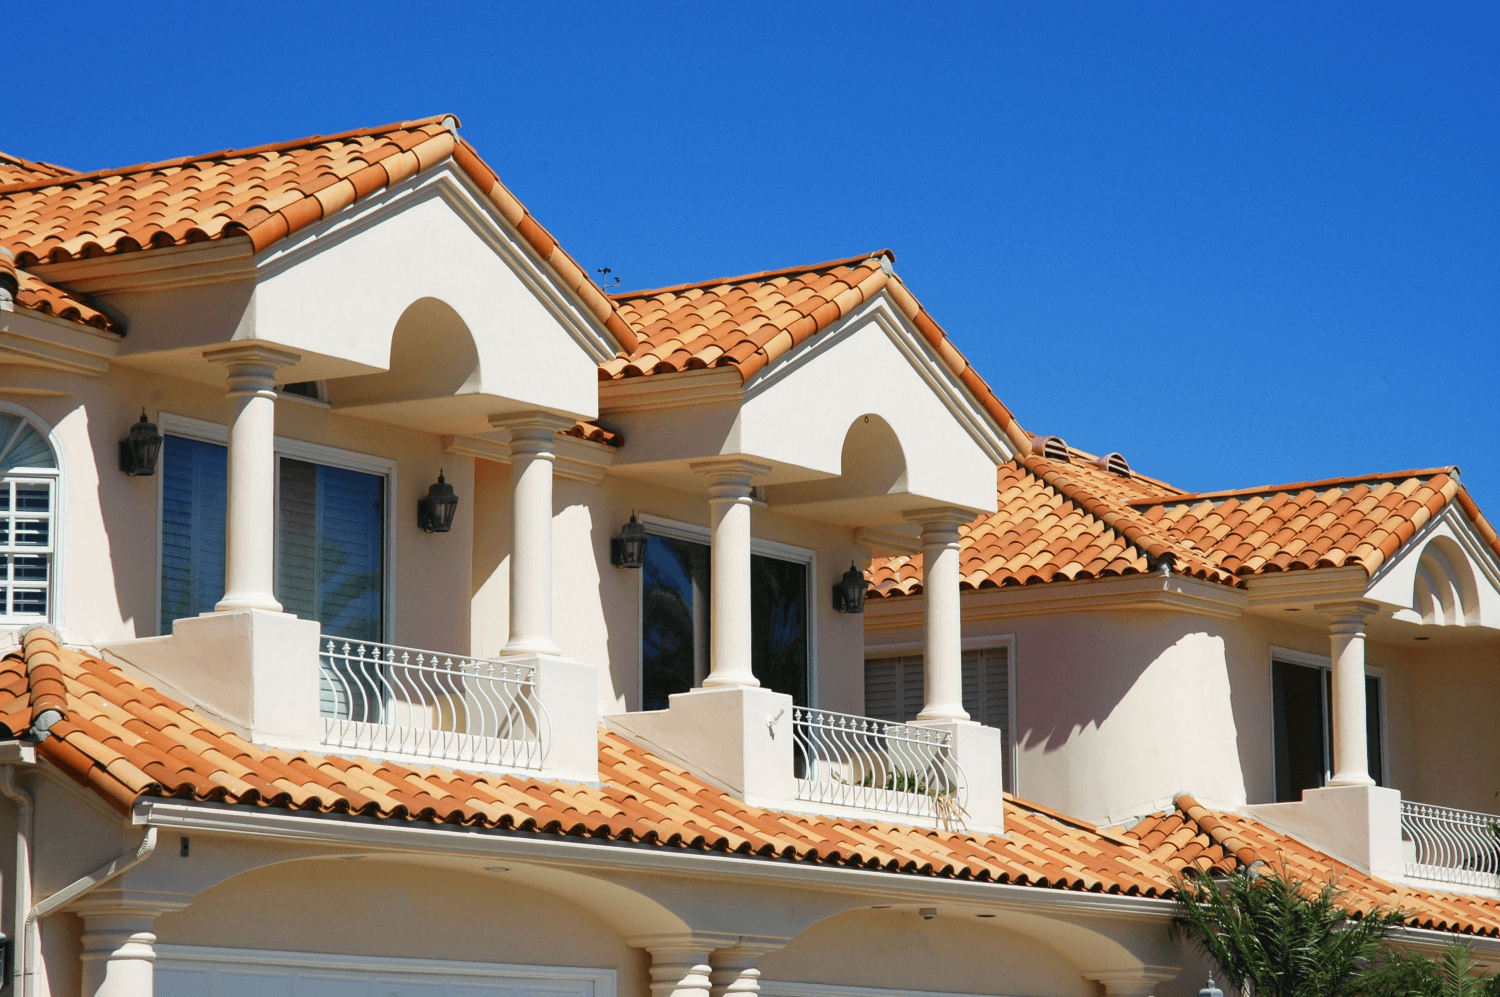 Roof Types Styles The Best Roofing Materials For Your California Home